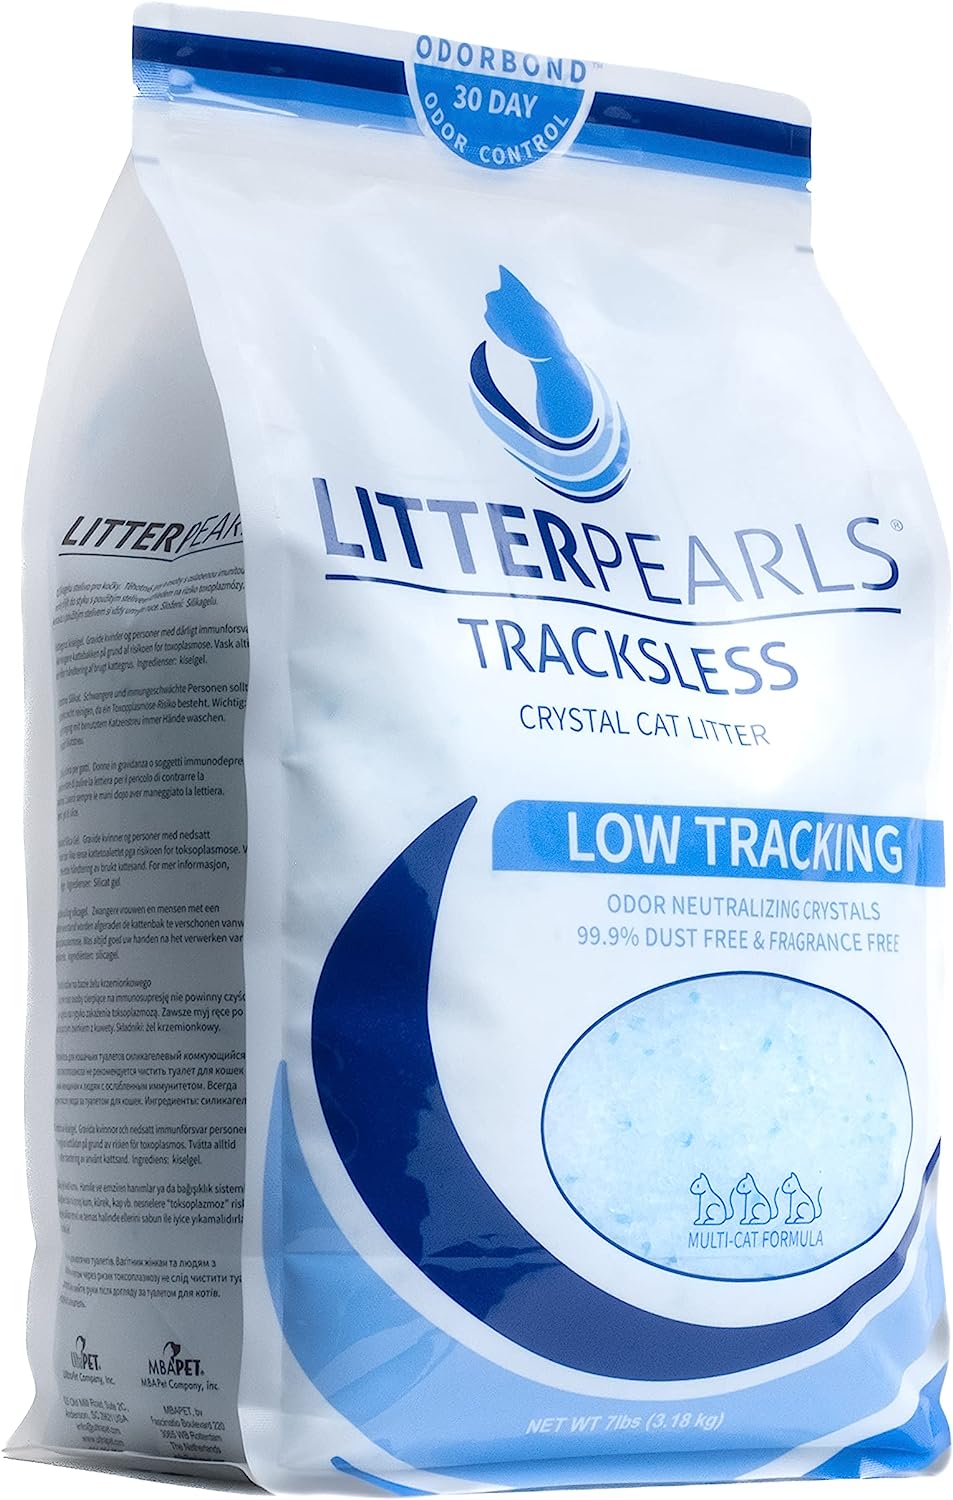 Litter Pearls Tracksless Unscented Crystal Cat Litter